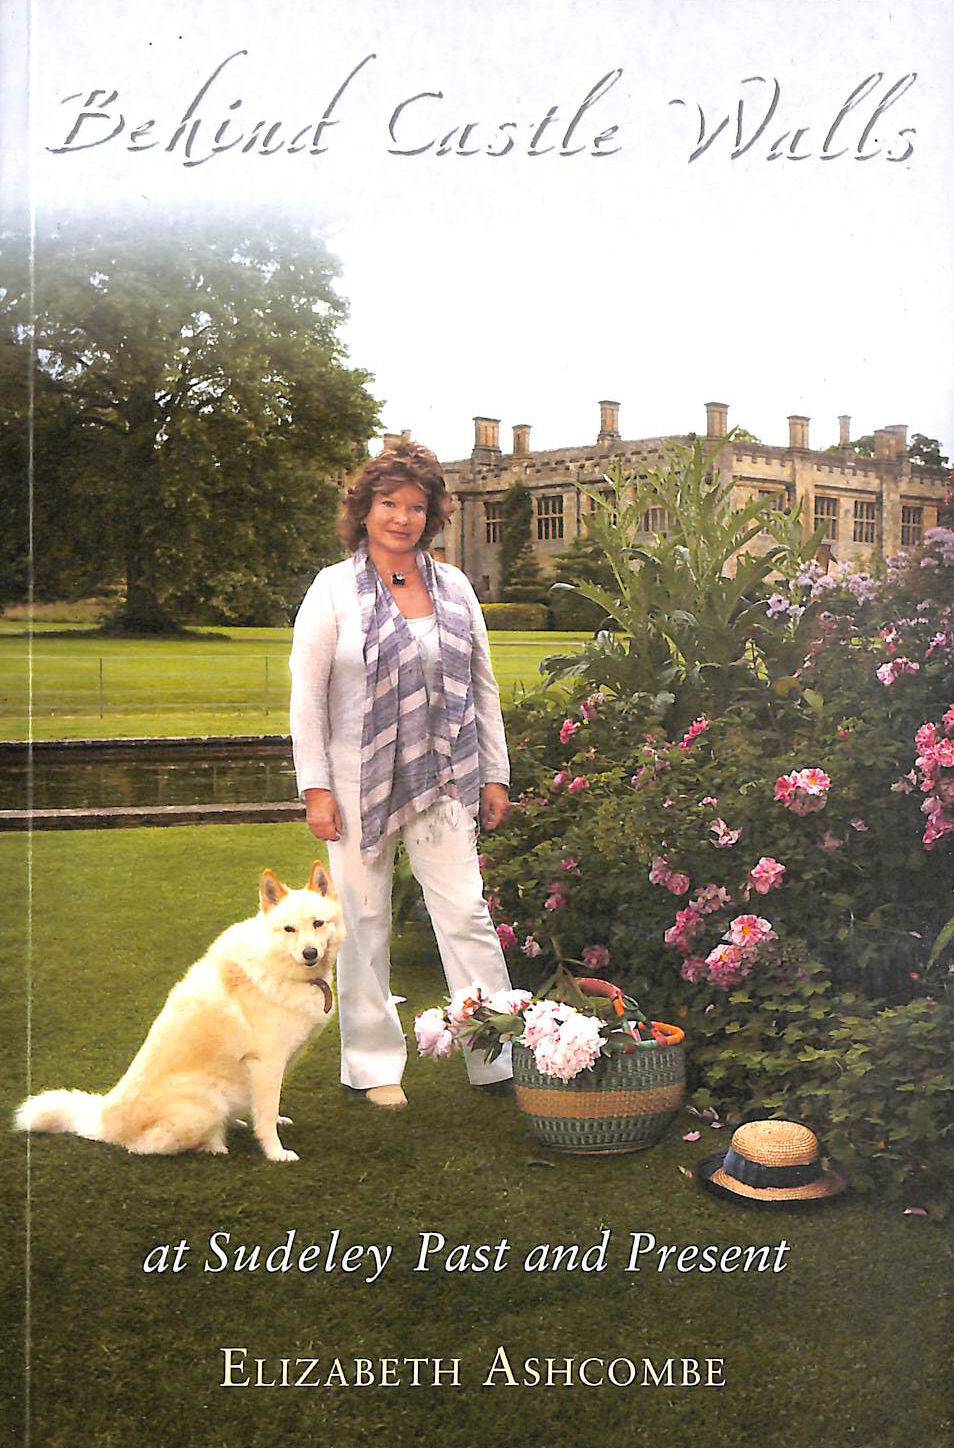 LADY ASHCOMBE - Behind Castle Walls At Sudeley Past And Present